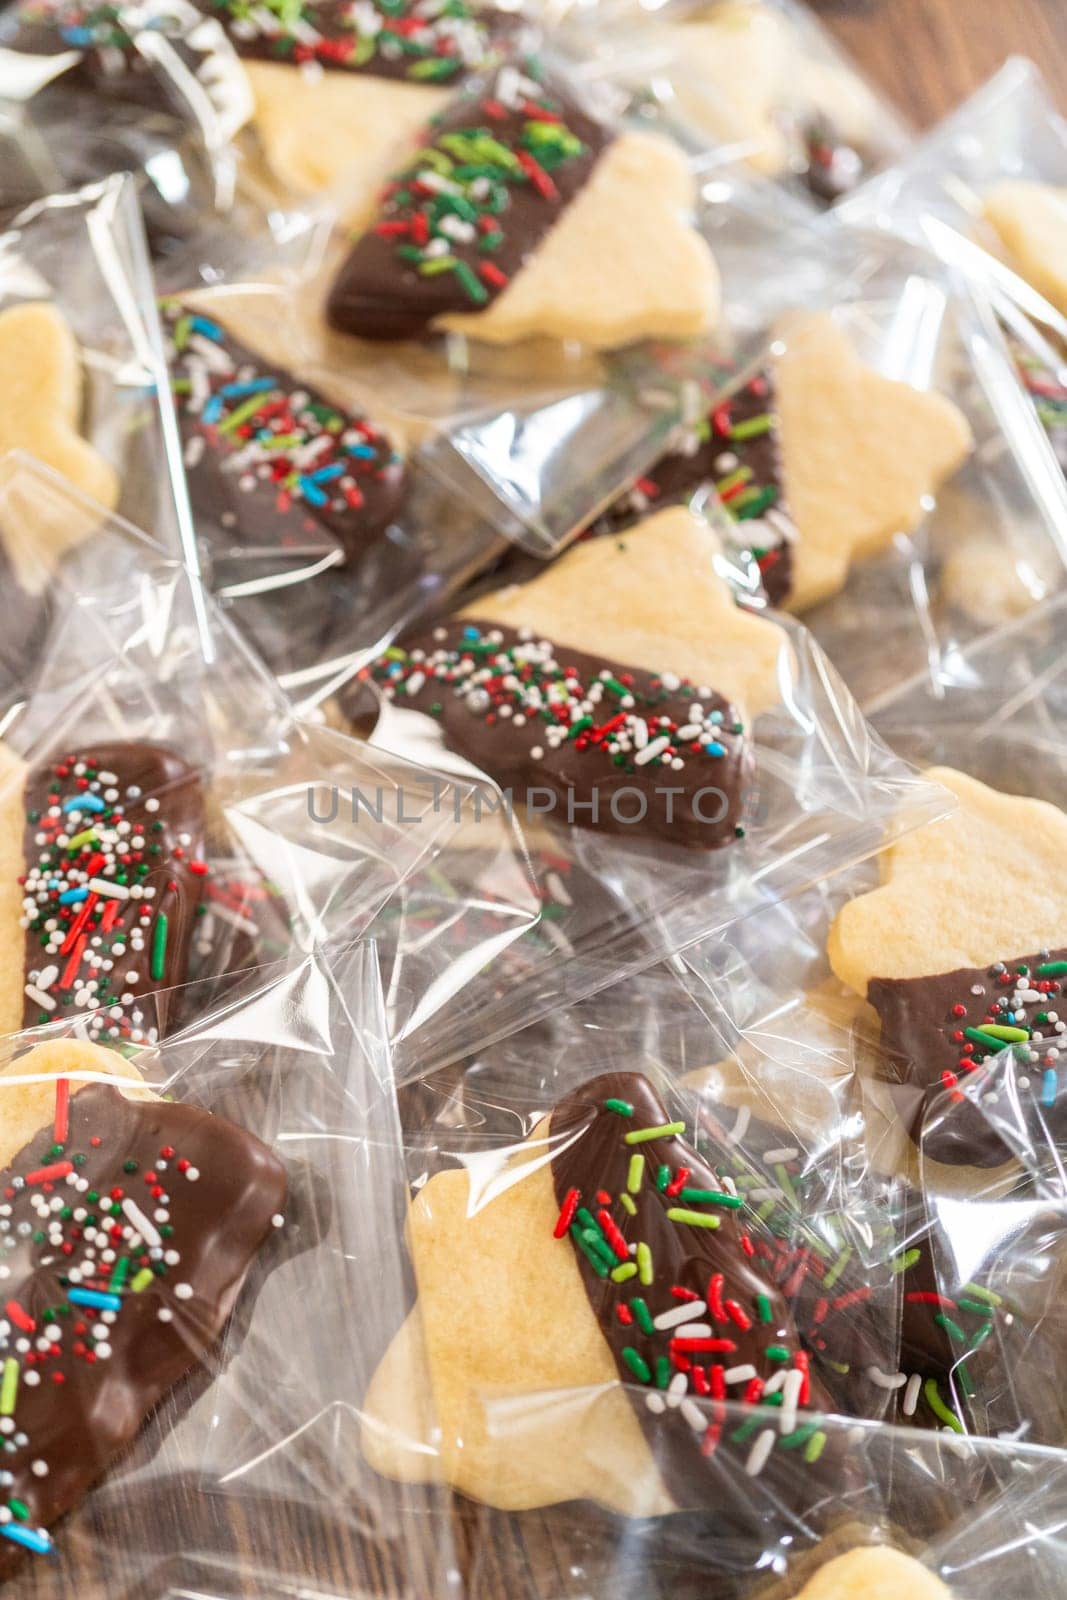 Festive Cookie Packaging with Chocolate-Dipped Christmas Delights by arinahabich